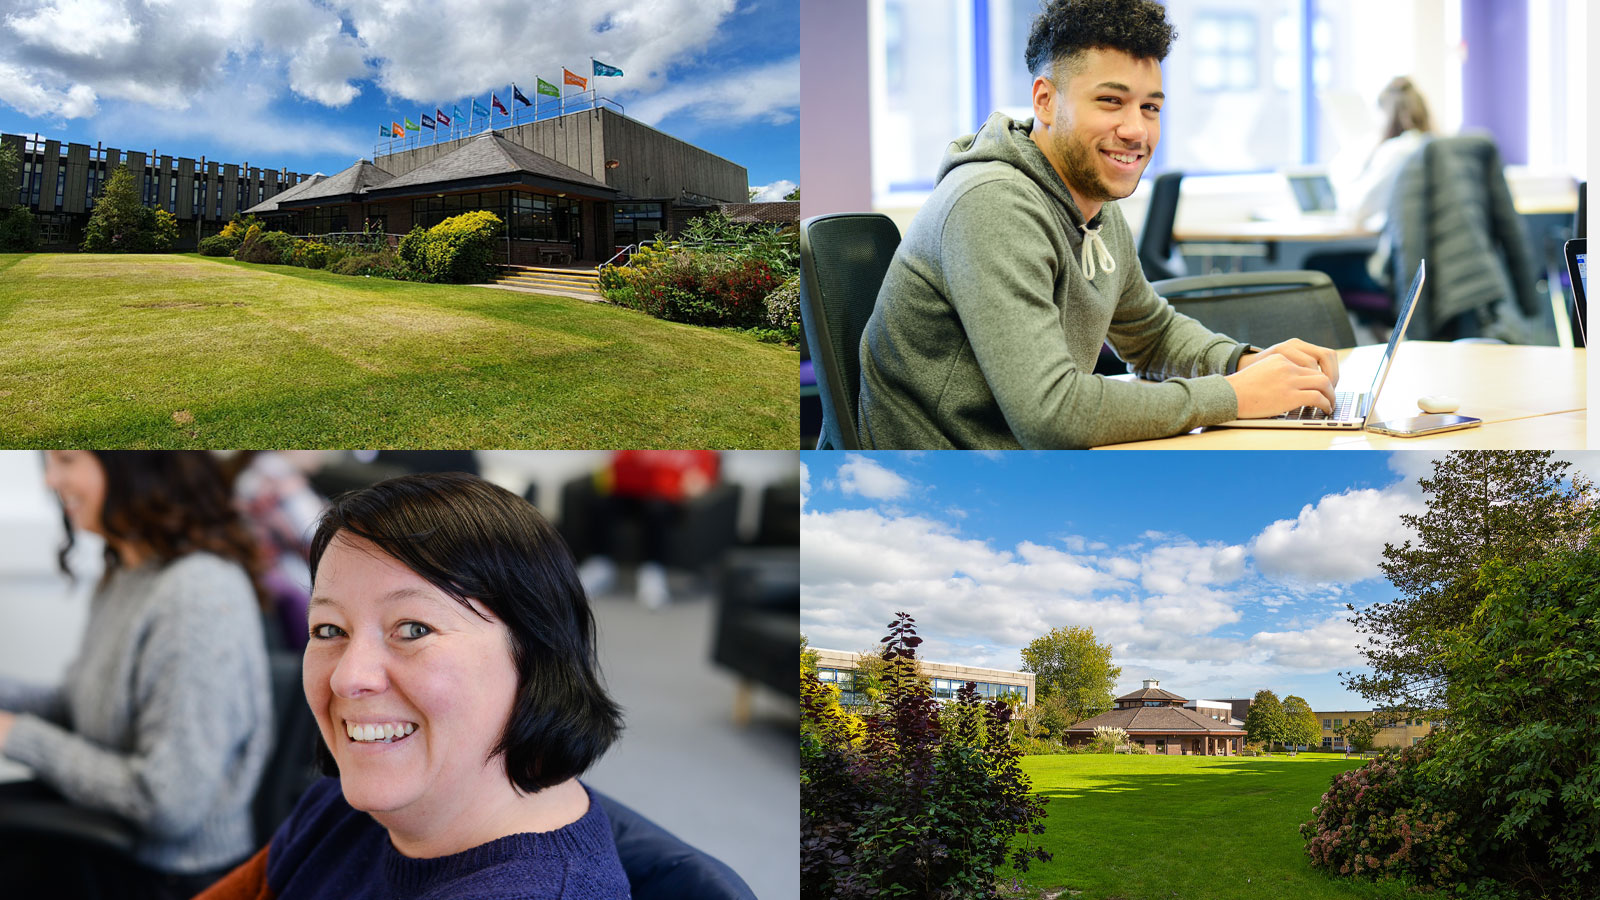 A collage of photos of Marjon campus and students